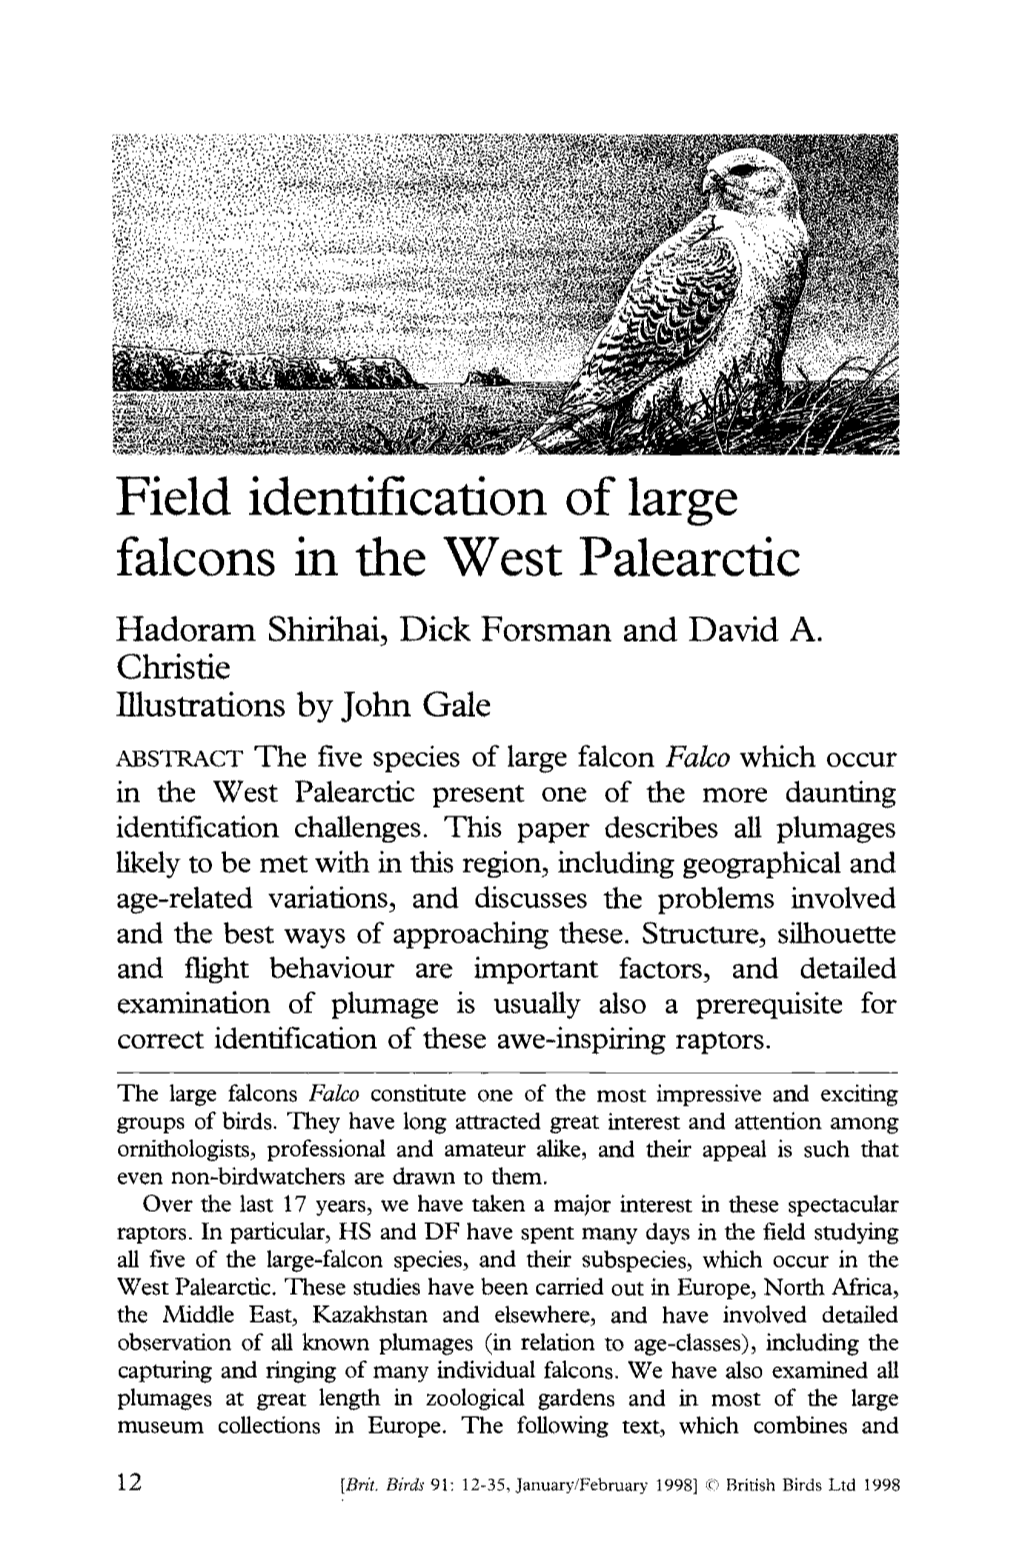 Field Identification of Large Falcons in the West Palearctic Hadoram Shirihai, Dick Forsman and David A